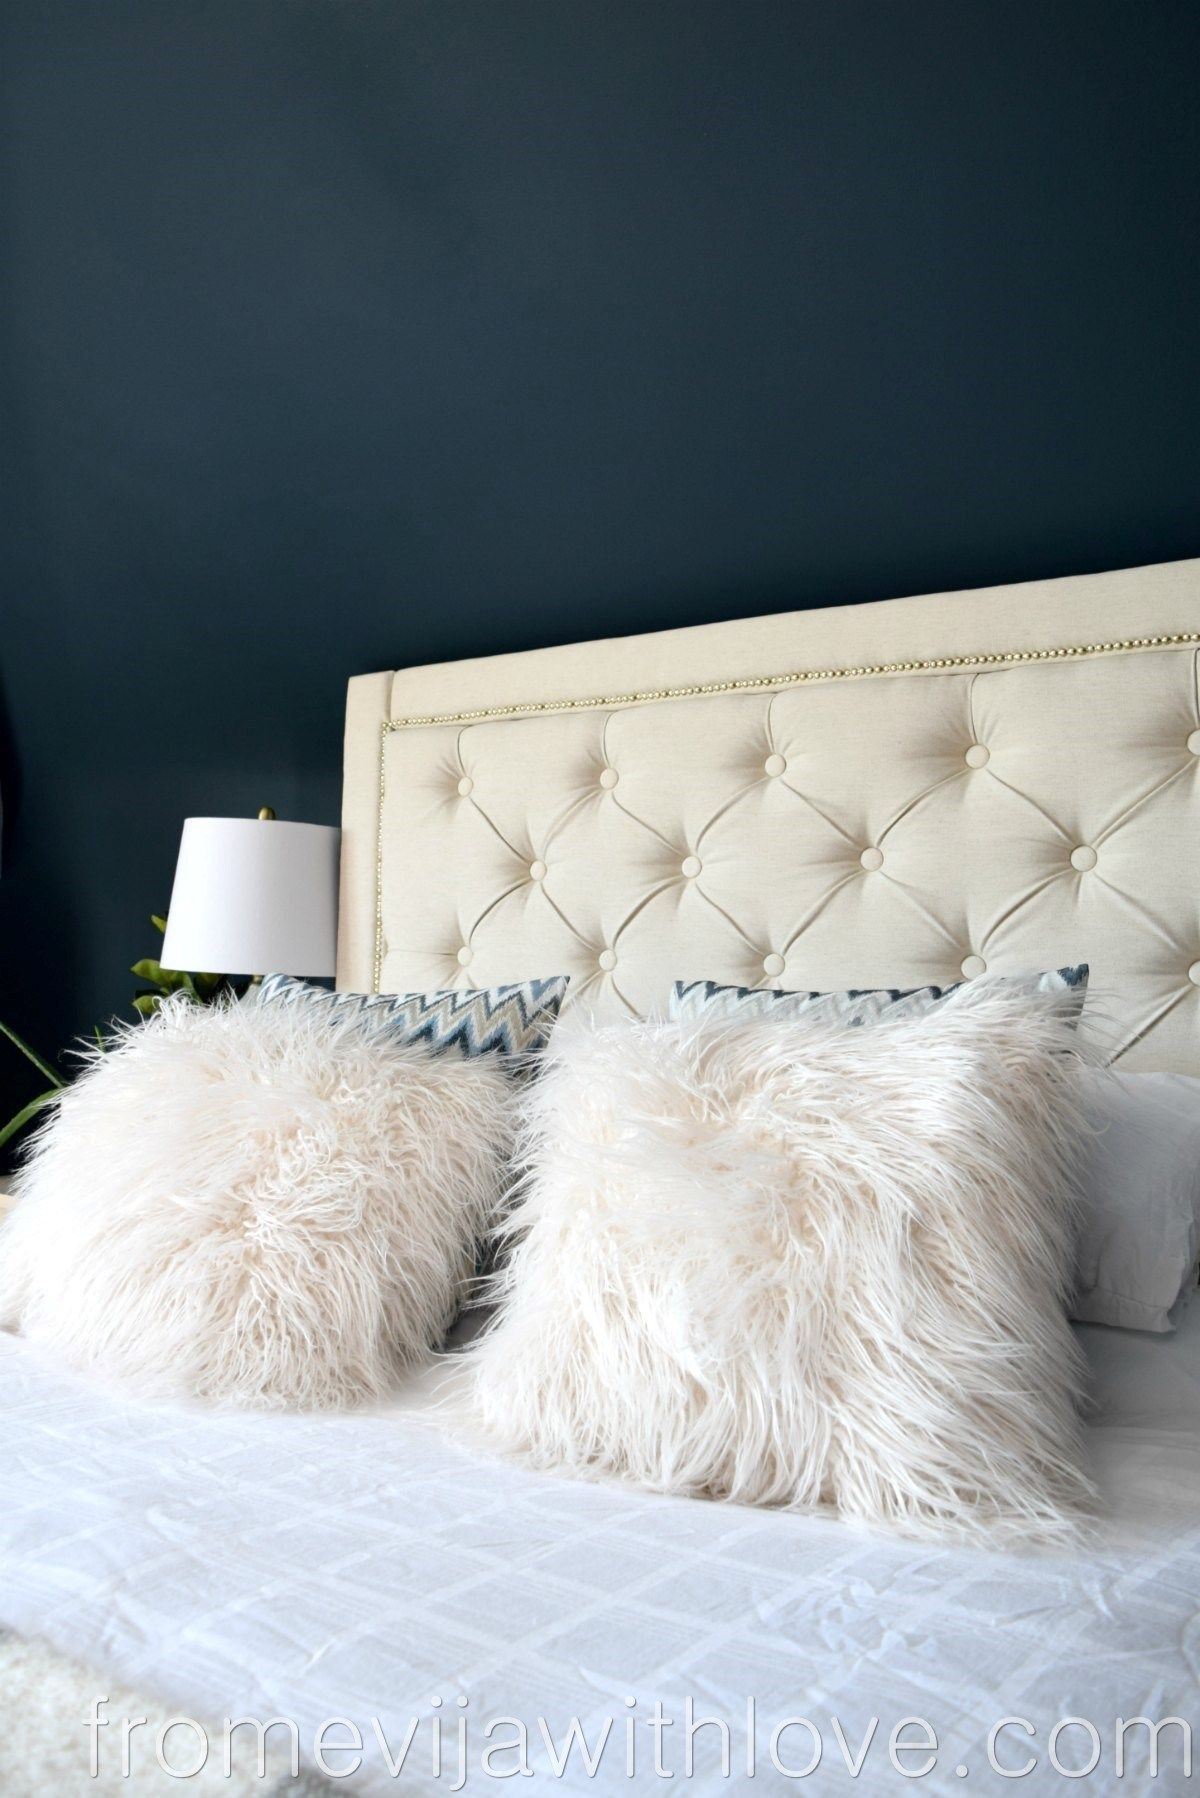 DIY How to Create a Diamond Tufted Upholstered Headboard -   21 diy projects For Bedroom tufted headboards
 ideas